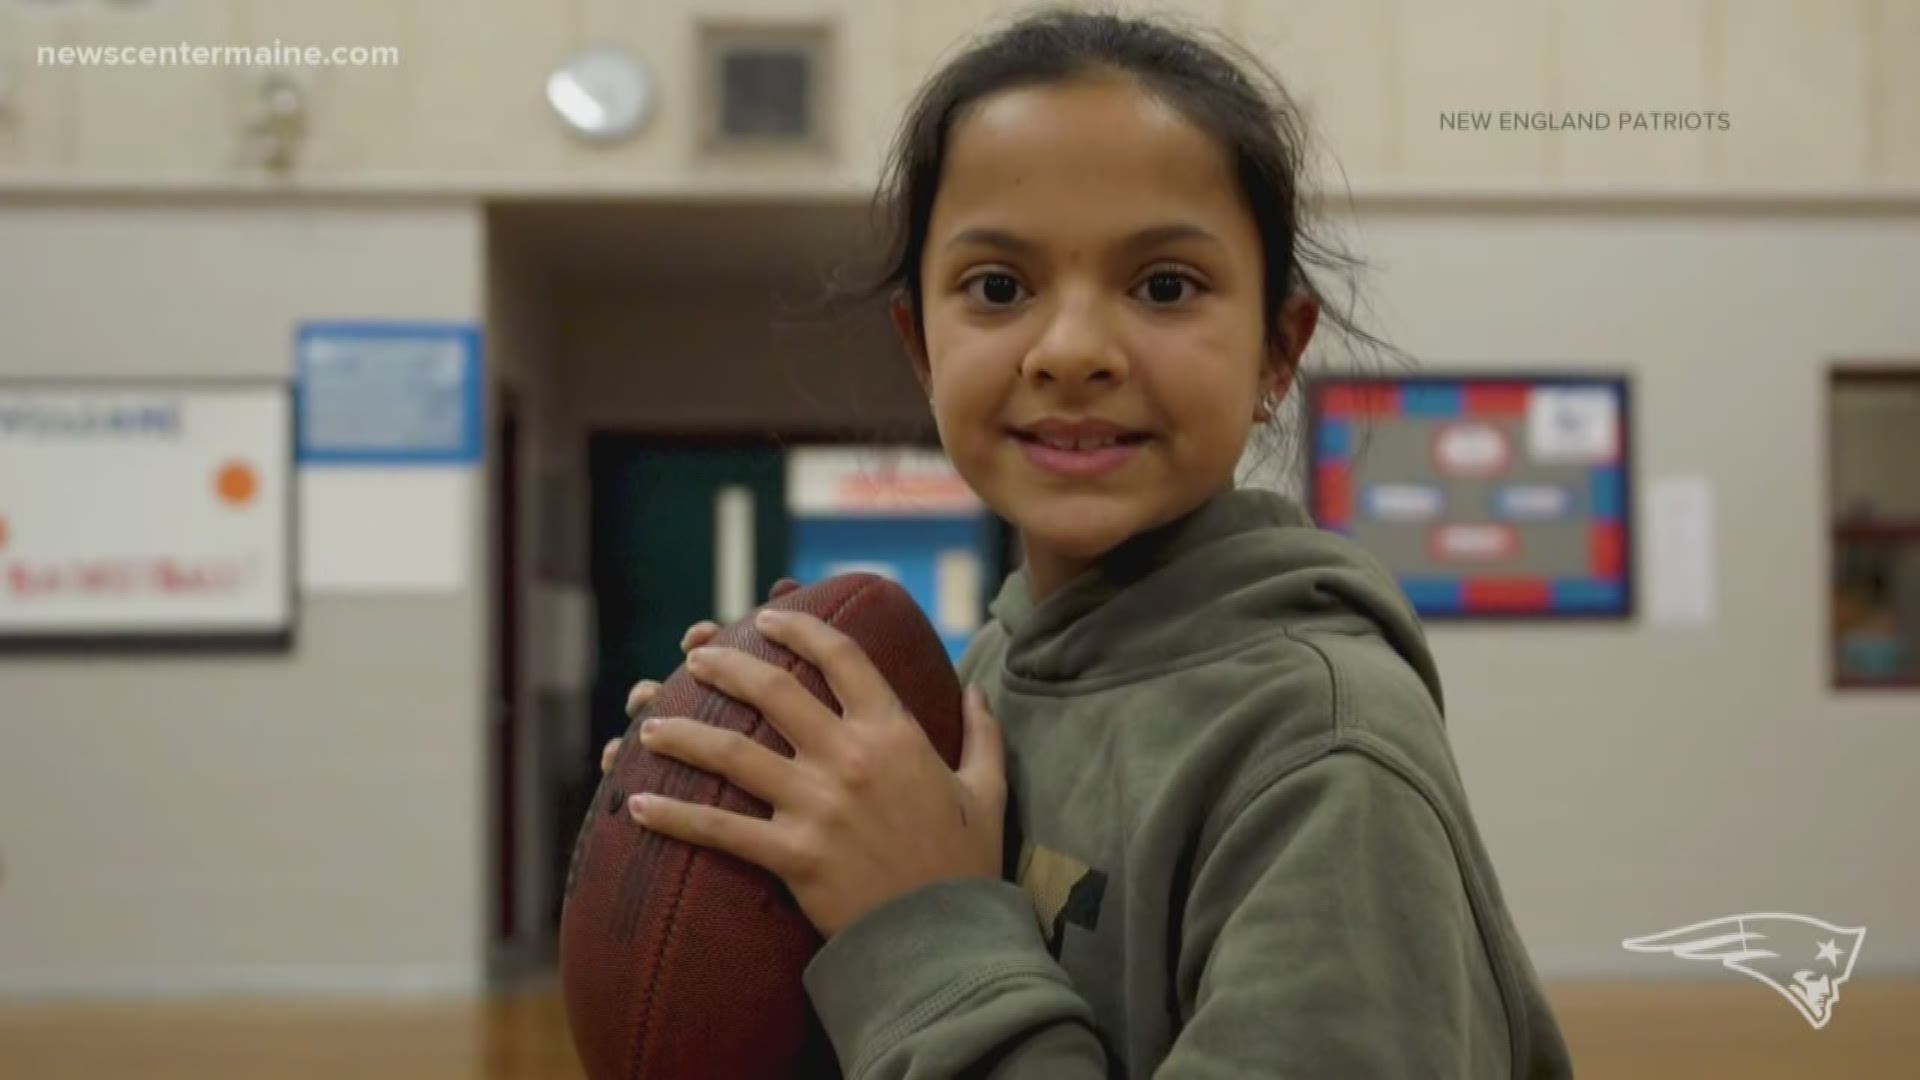 Twelve-year-old Stella Hang from Portland will head to the Super Bowl to represent New England in a NFL ad.